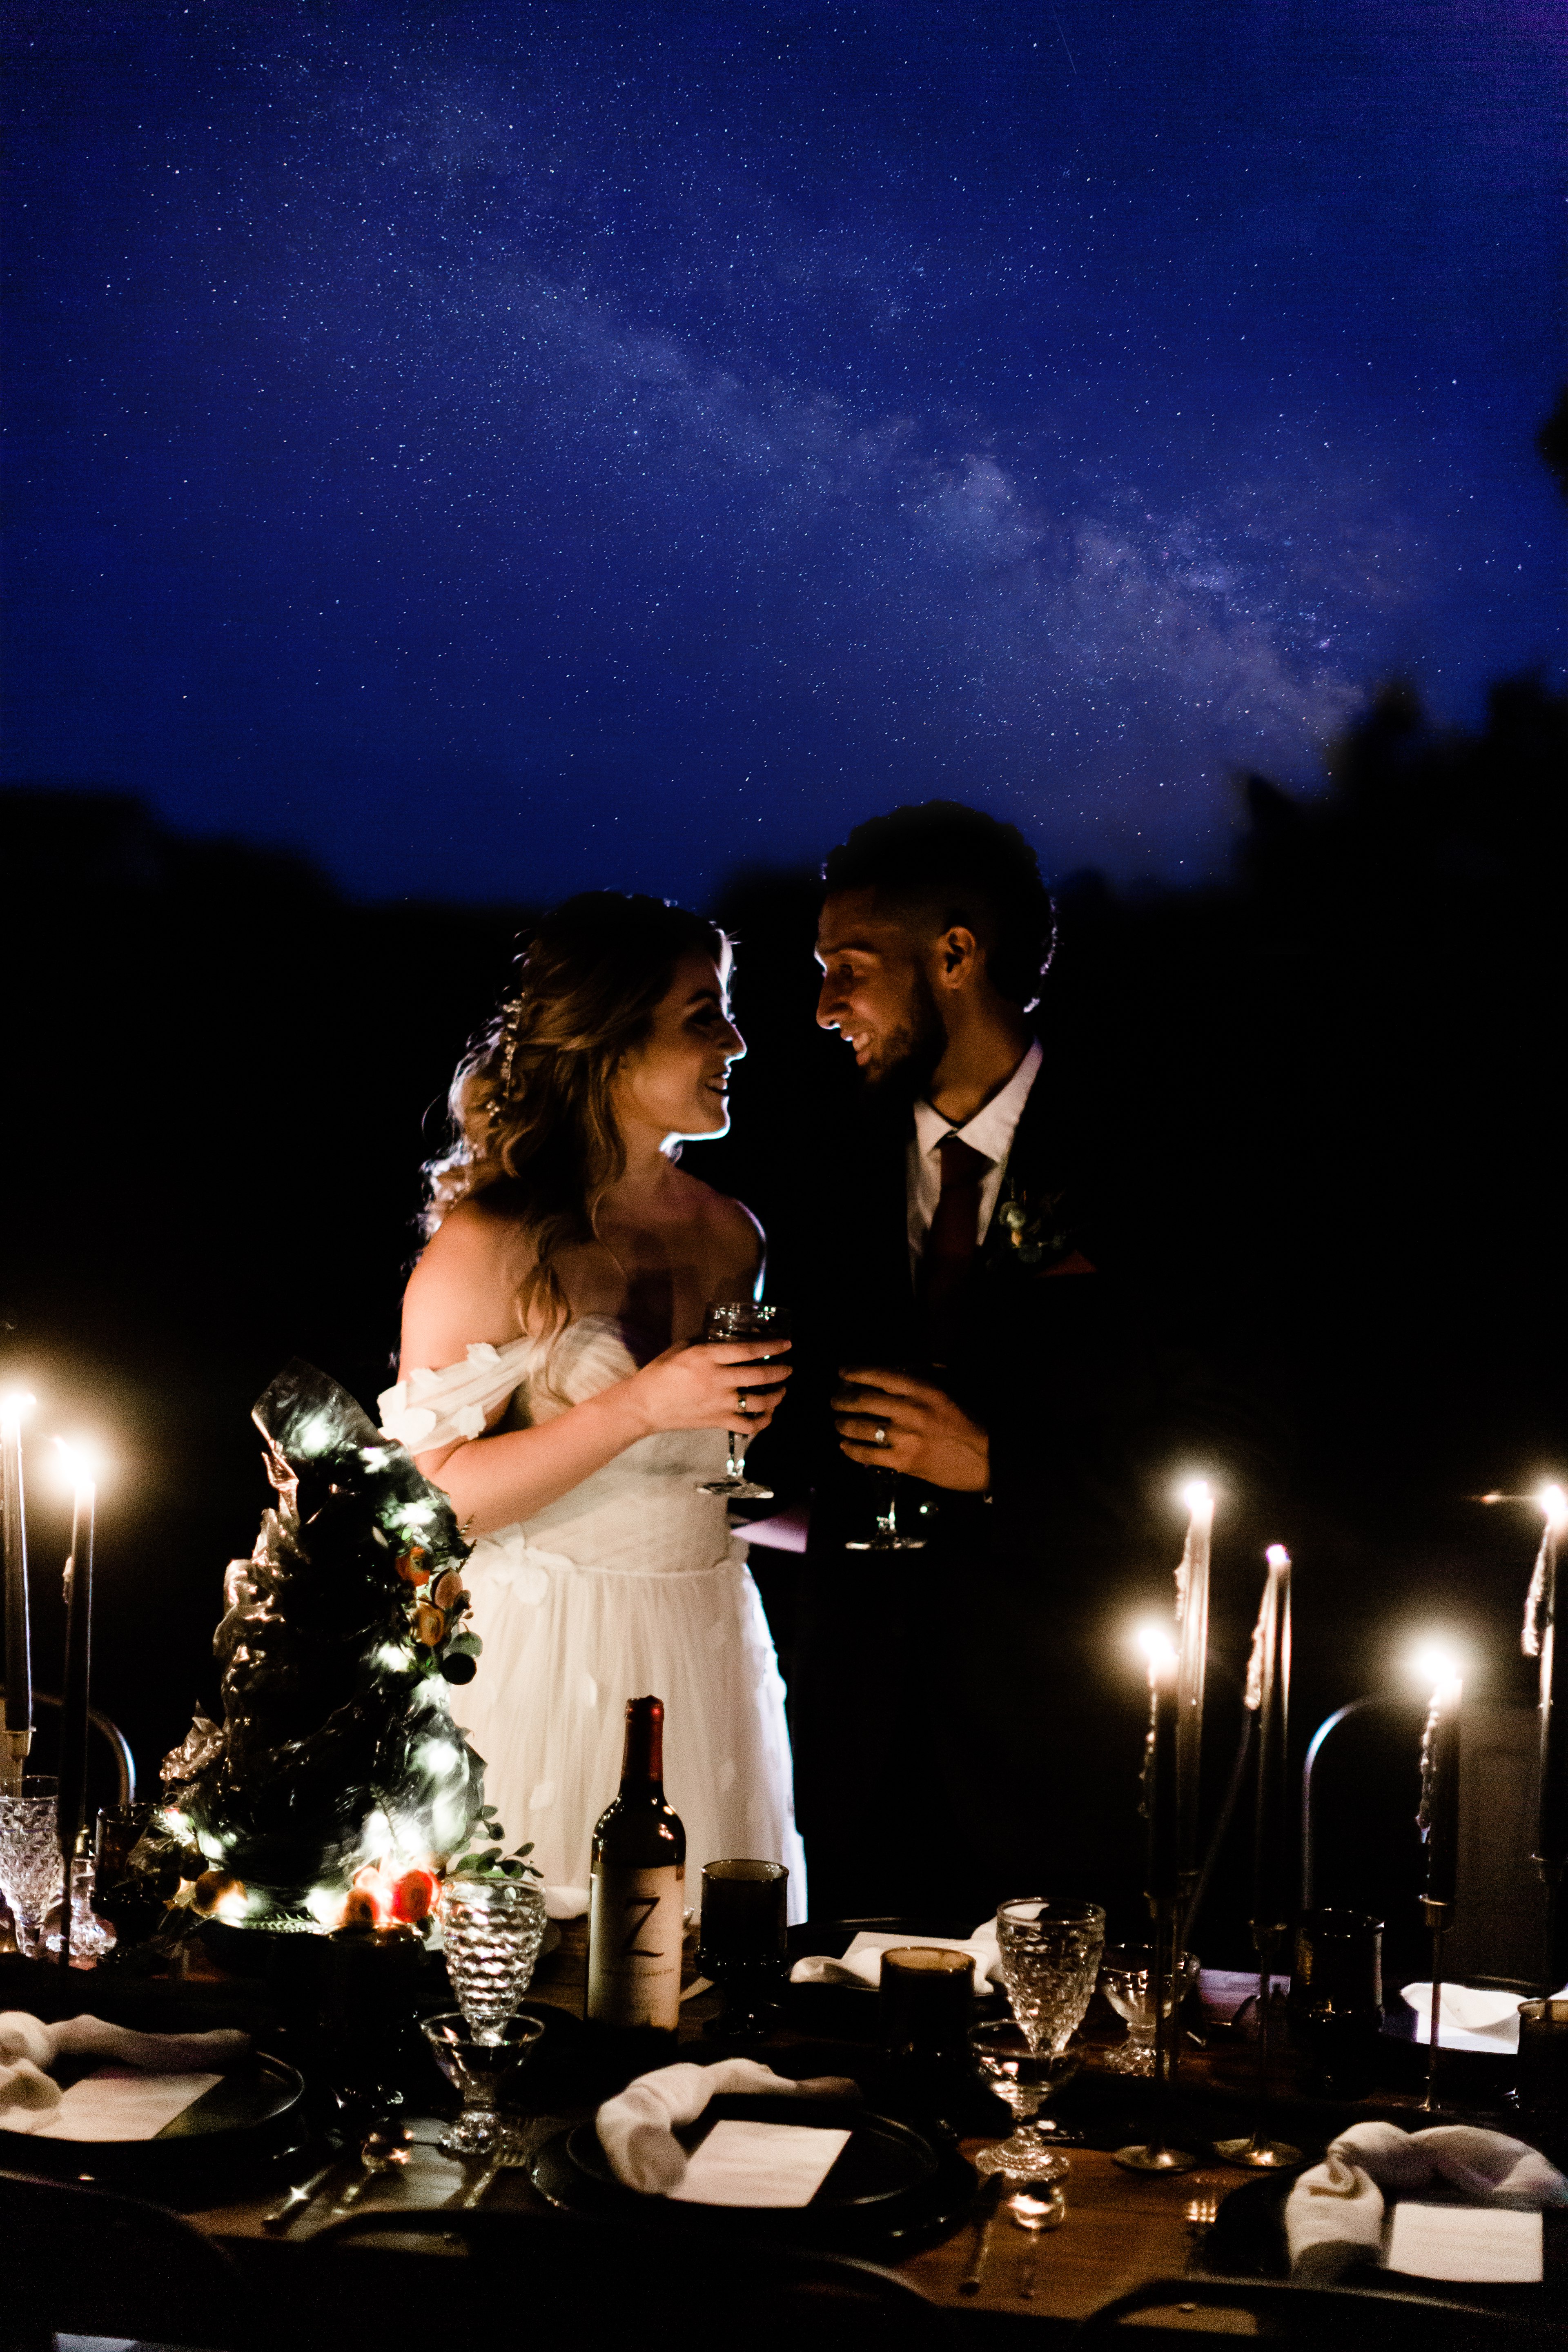 astro wedding photography by megan helm photography a fresno wedding photographer